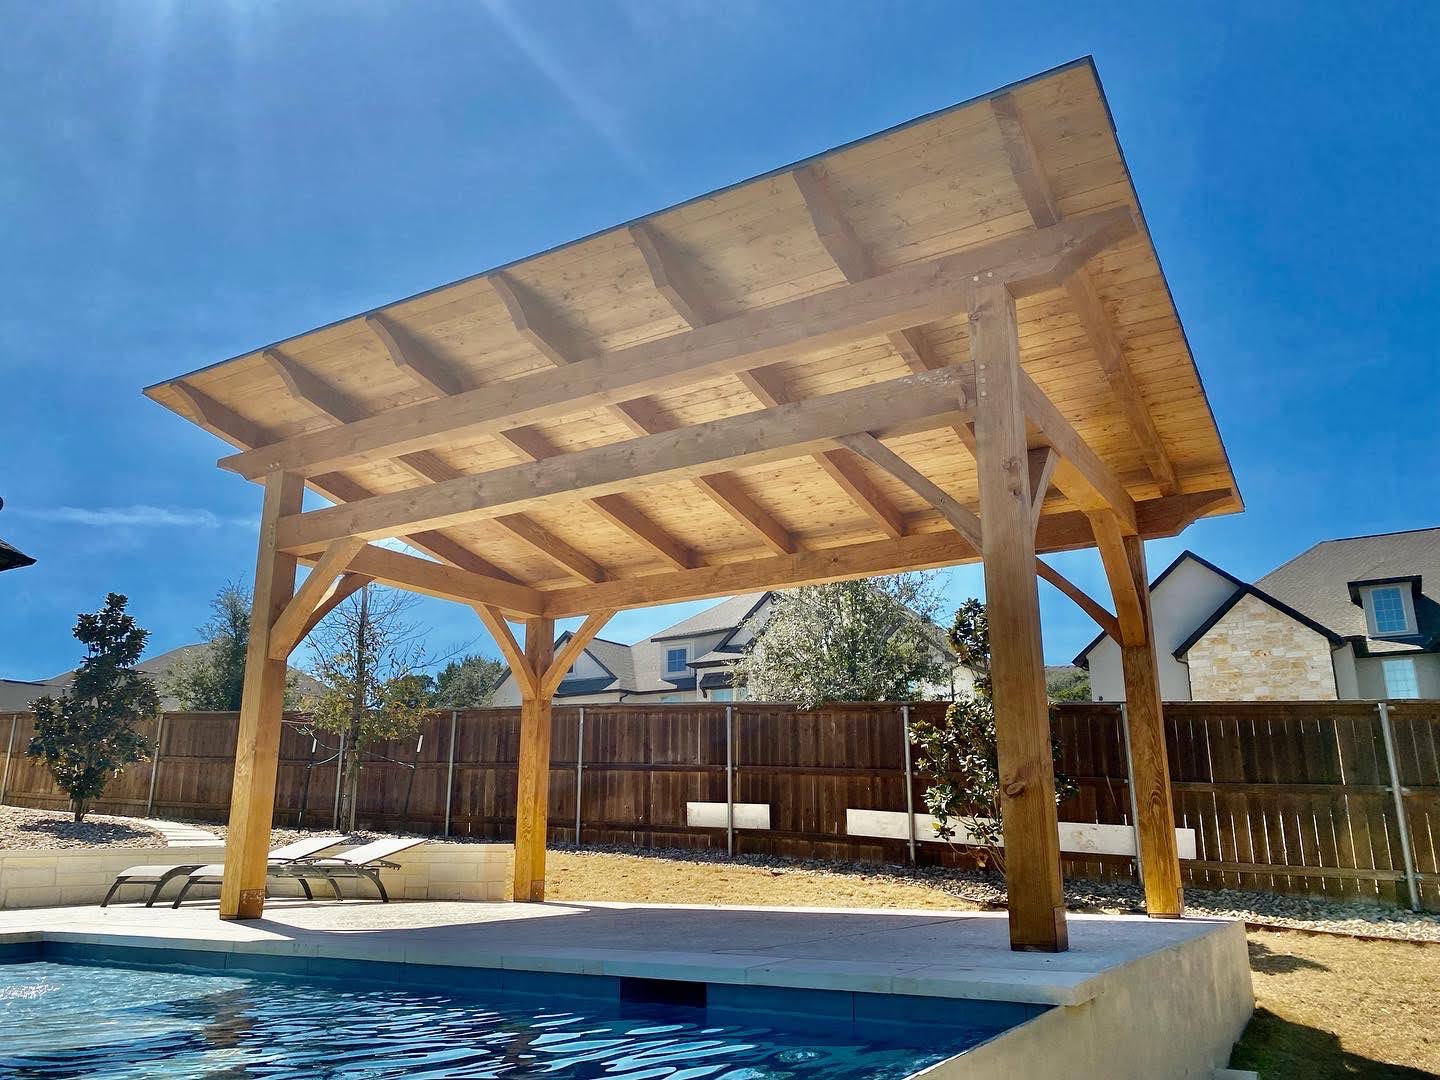 Houston, 18'x14'; heavy timbers, shingle roof, cedar, poolside or swimming pool, patio furniture, concrete or cement, pool, cabana, pavilion kit, free standing pavilion, pre fab, post and beam, shade structure